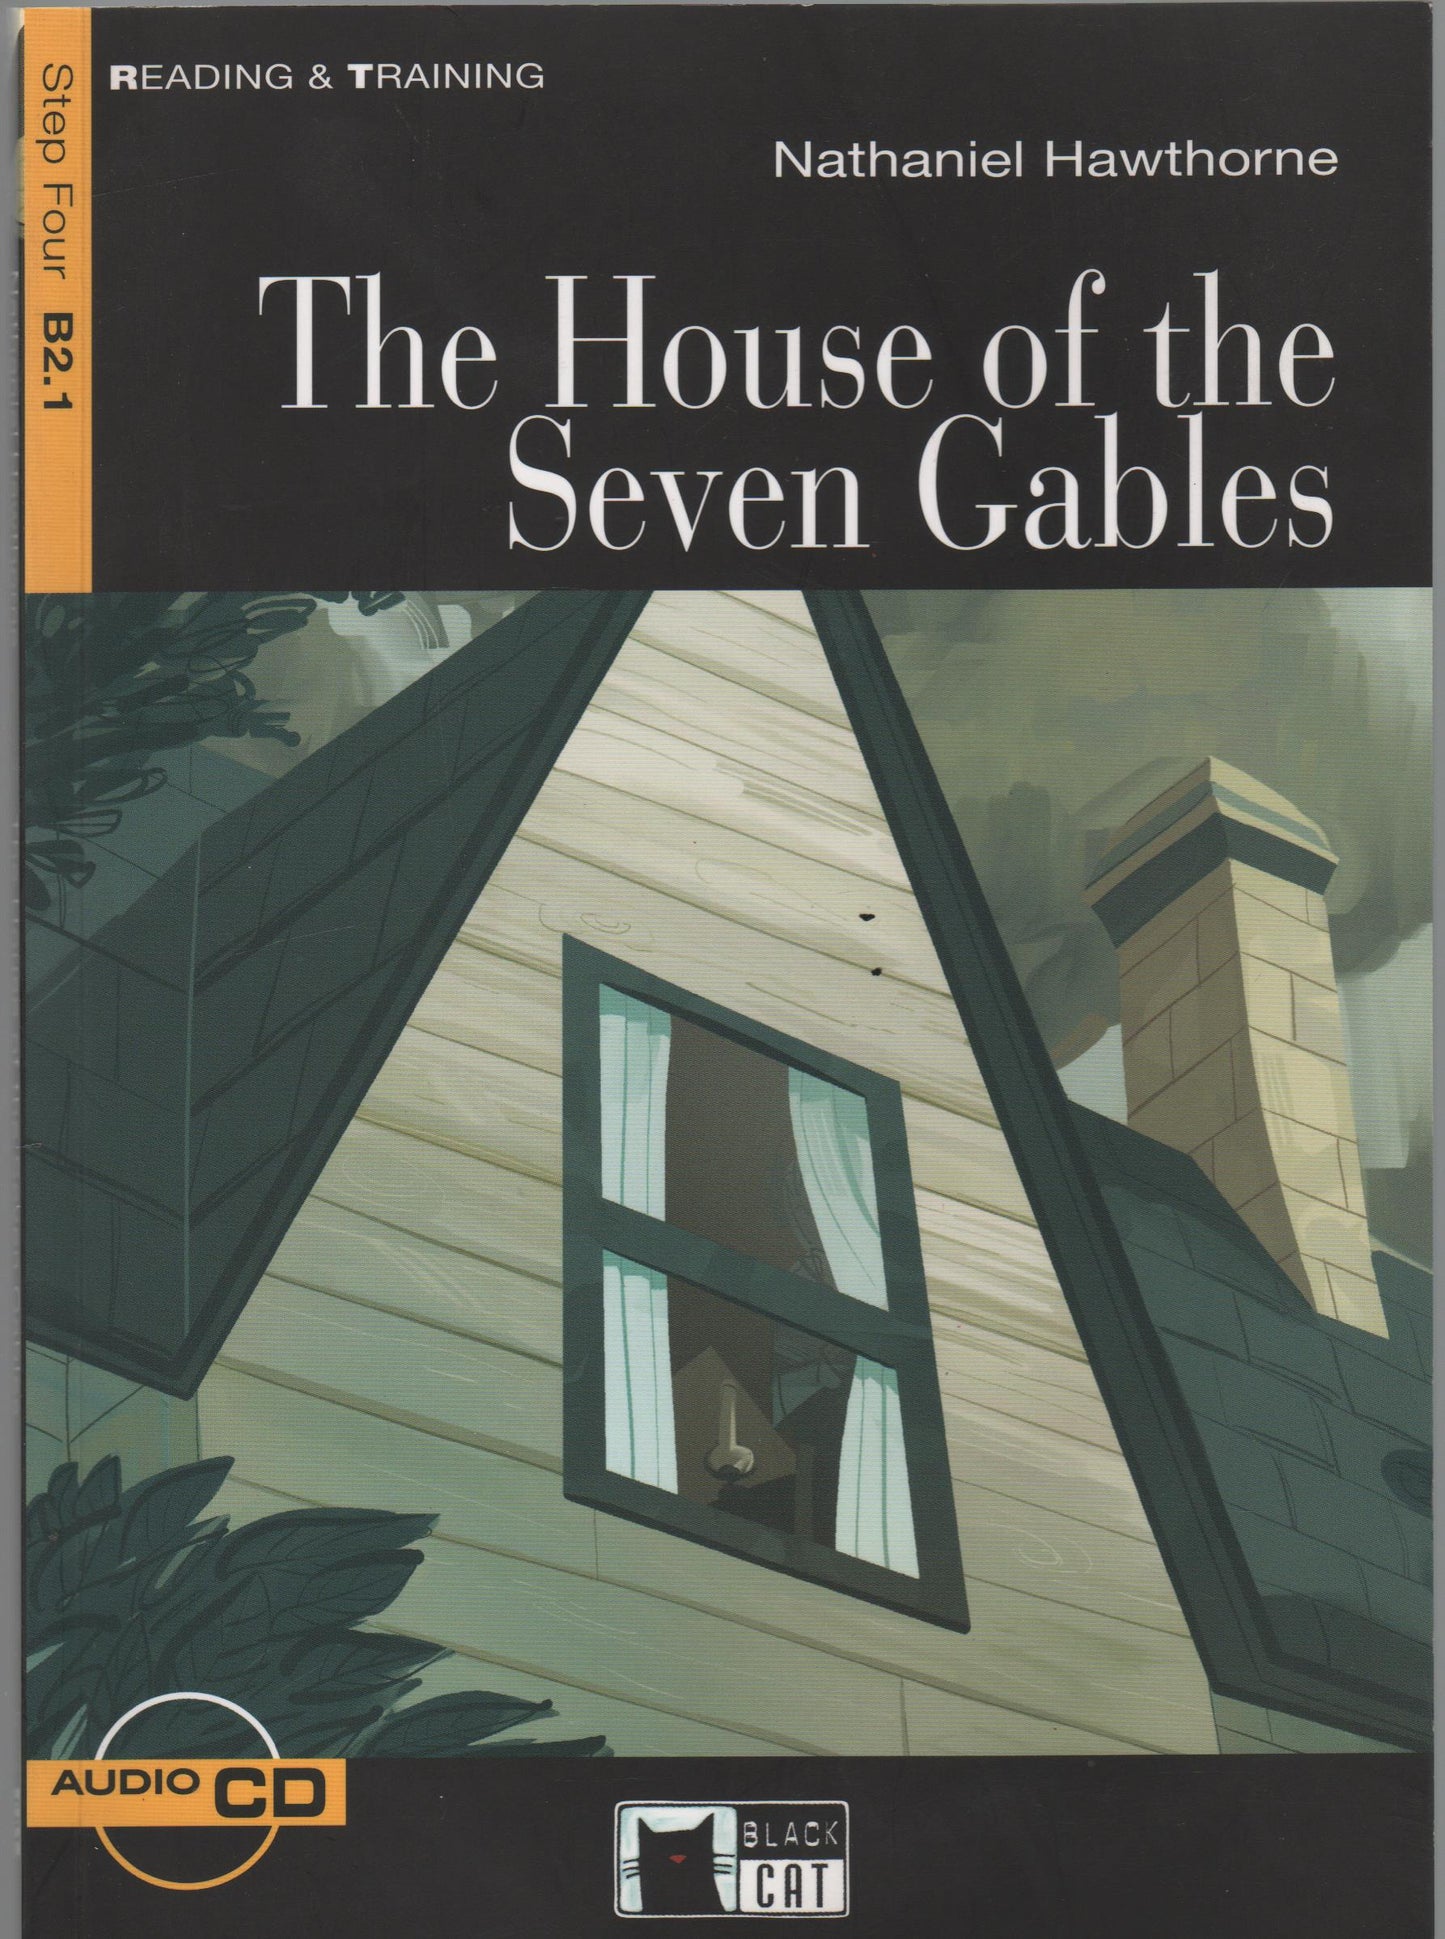 THE HOUSE OF THE SEVEN GABLES